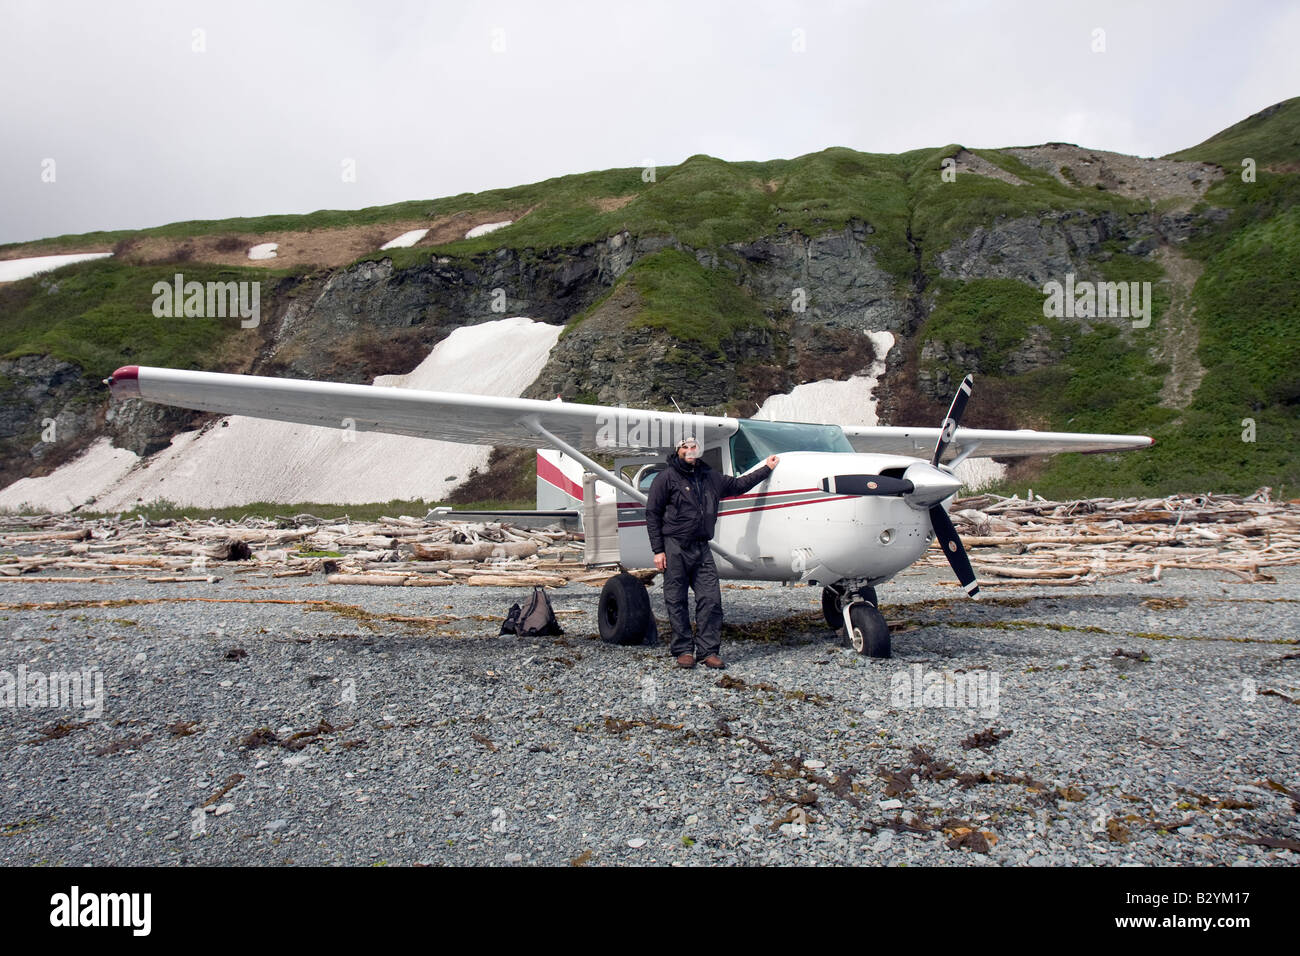 K-Bay Air air plane (Cessna 206) and pilot standing on a beach filled with driftwood in the Katmai National Park and Preserve, Alaska, US Stock Photo